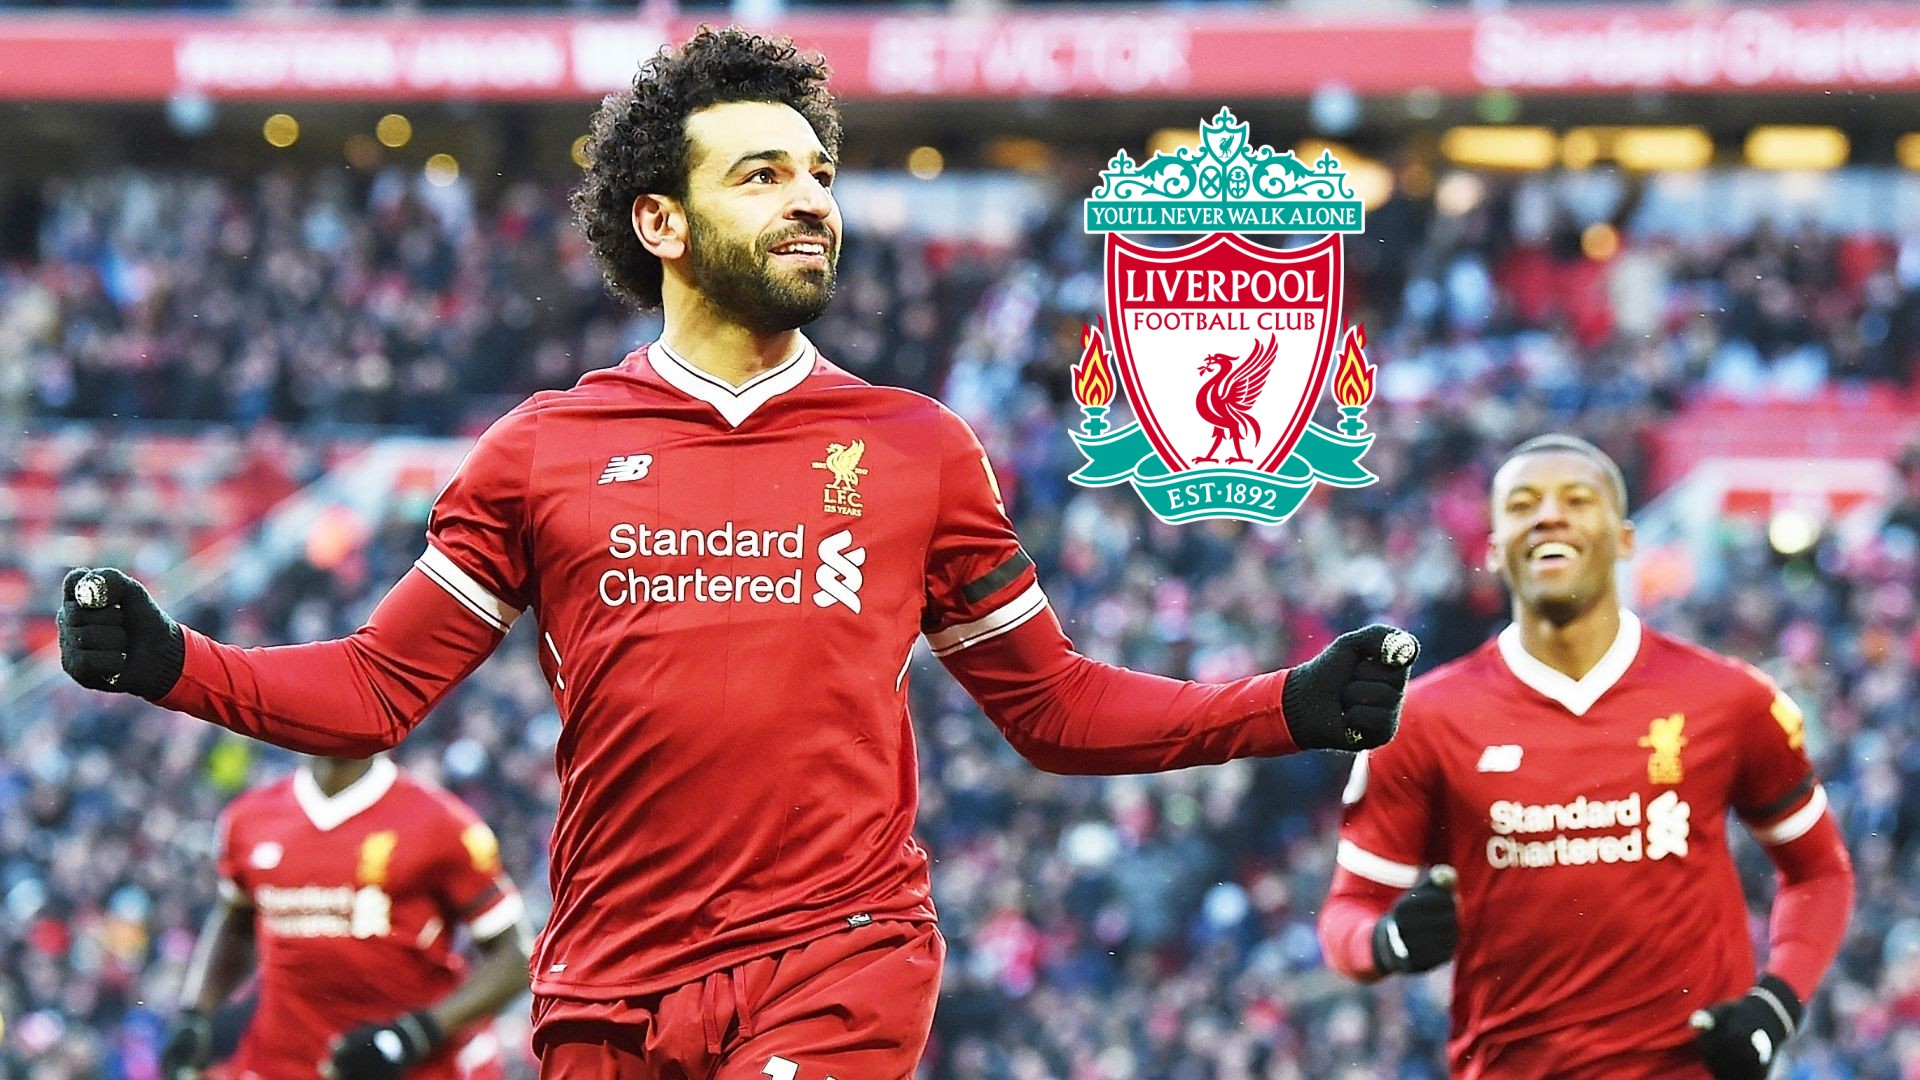 Mohamed Salah Liverpool Background Wallpaper HD With Resolution 1920X1080 pixel. You can make this wallpaper for your Desktop Computer Backgrounds, Mac Wallpapers, Android Lock screen or iPhone Screensavers